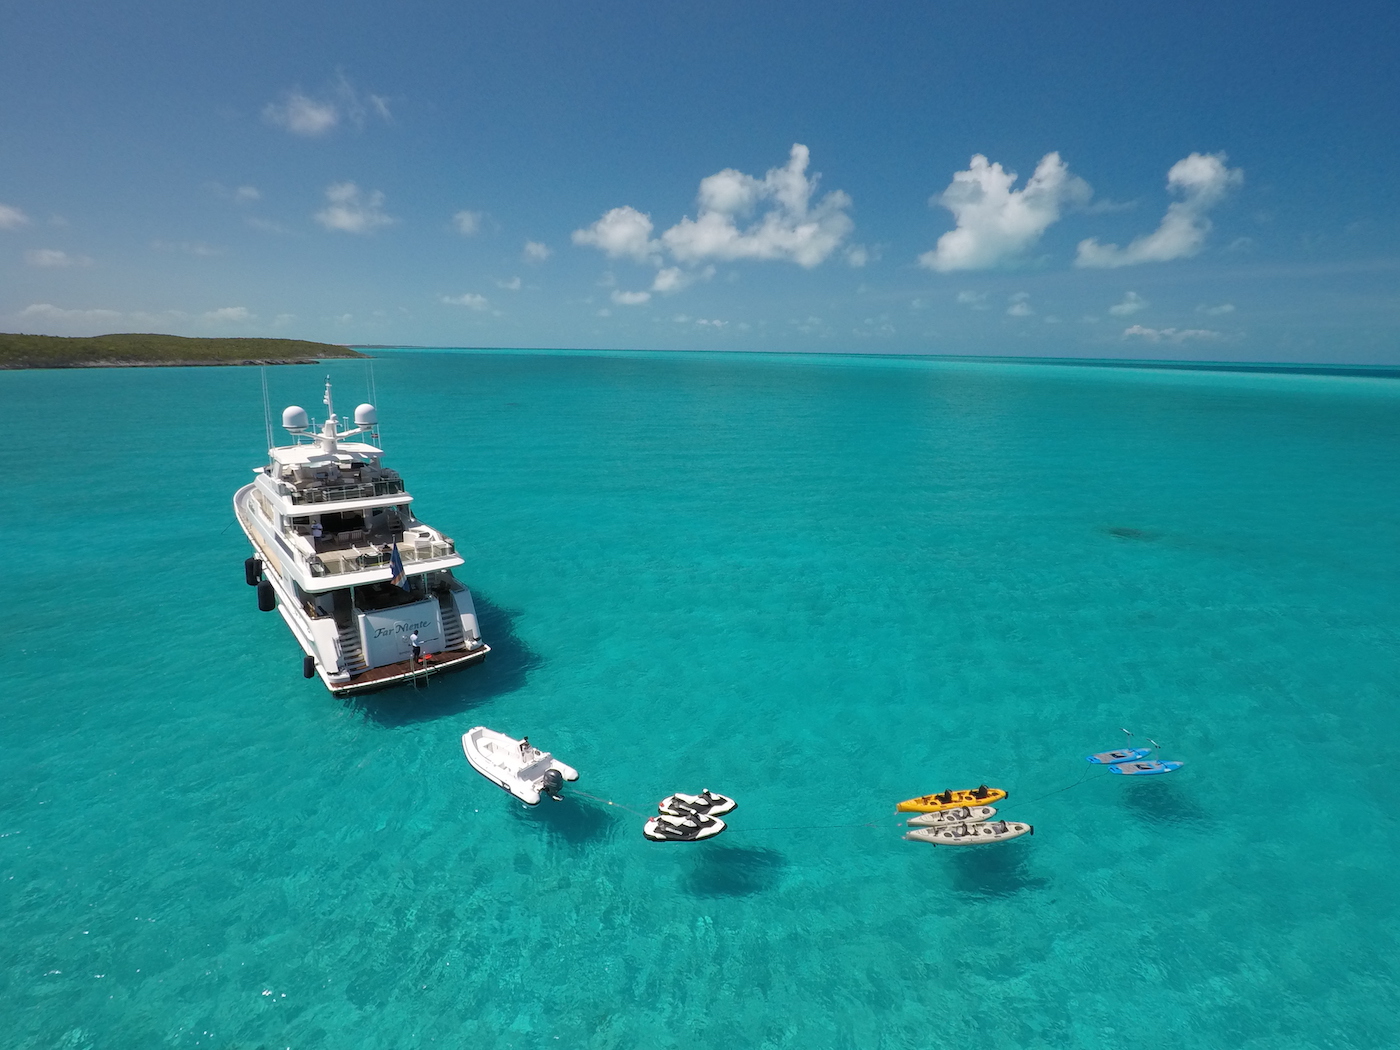 Top recommended luxury yachts to charter in the Caribbean & Bahamas and the Maldives & Seychelles this winter season